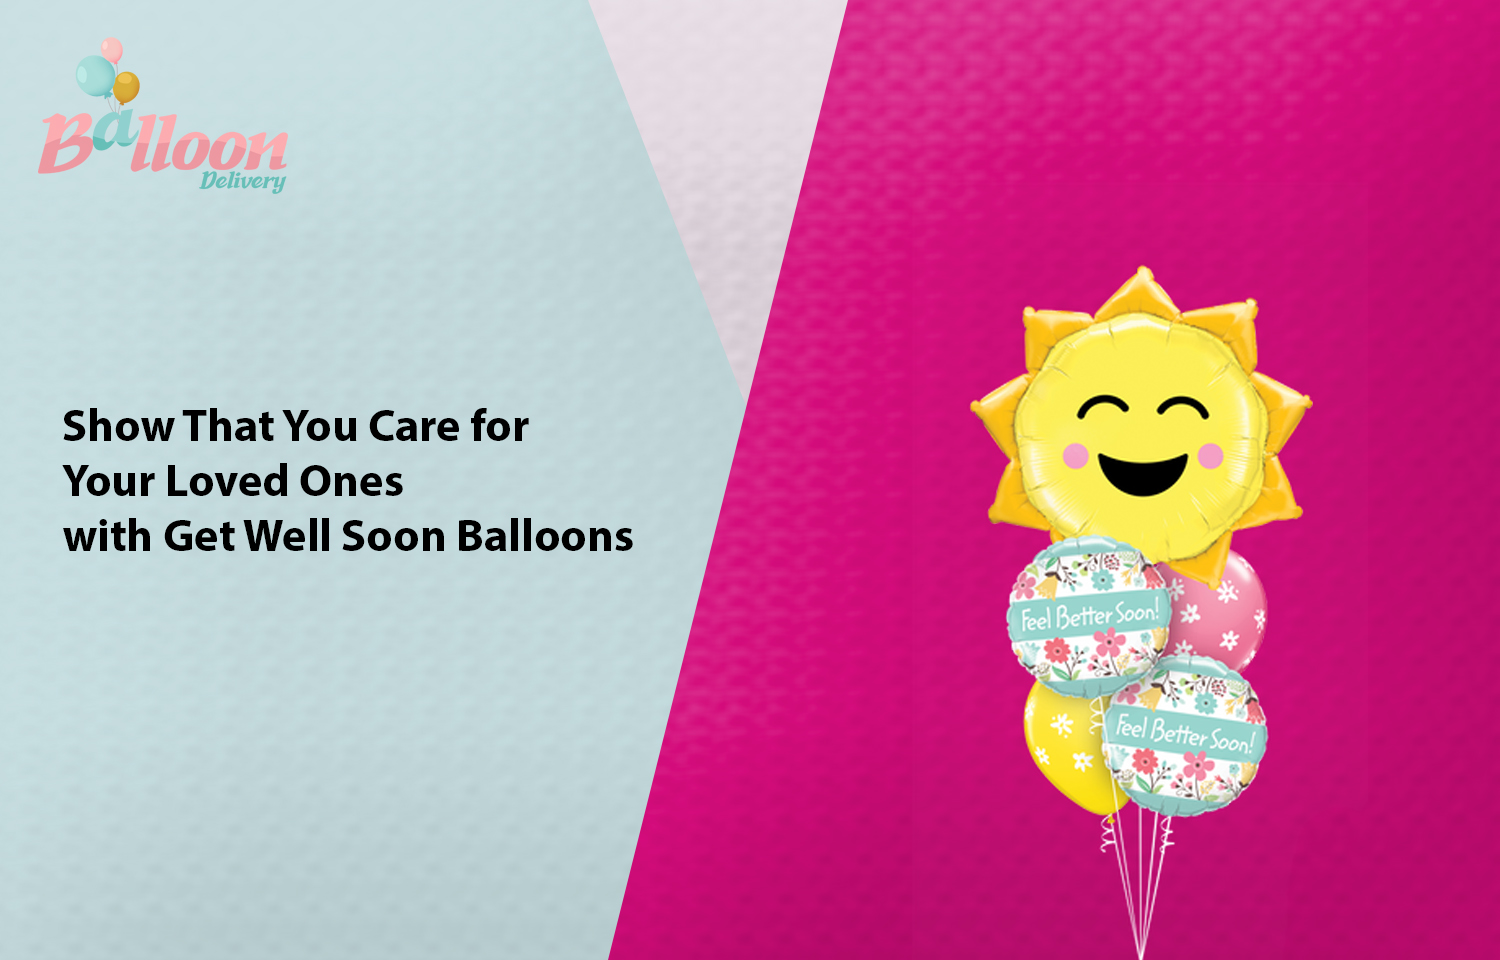 Show That You Care for Your Loved Ones with Get Well Soon Balloons